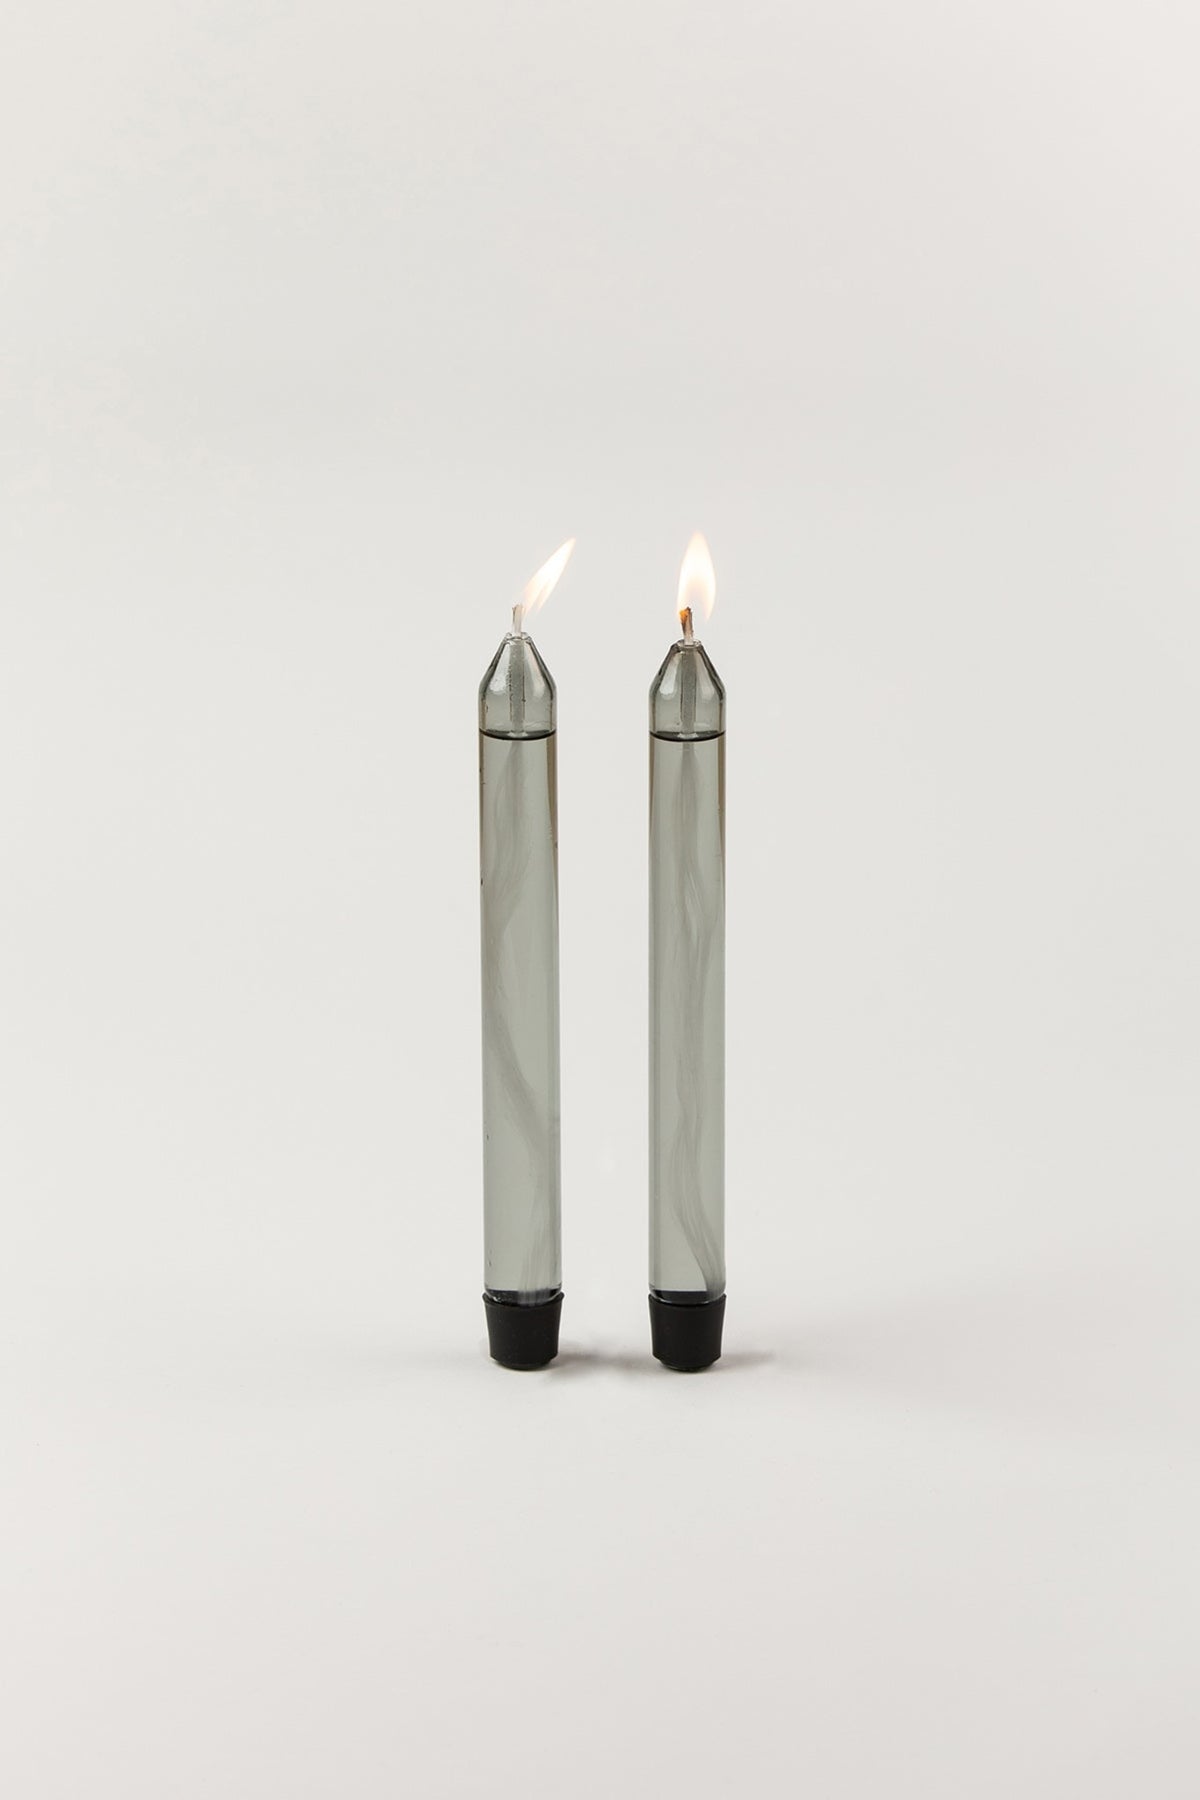 GLASS CANDLES, OIL CANDLES, SMOKE